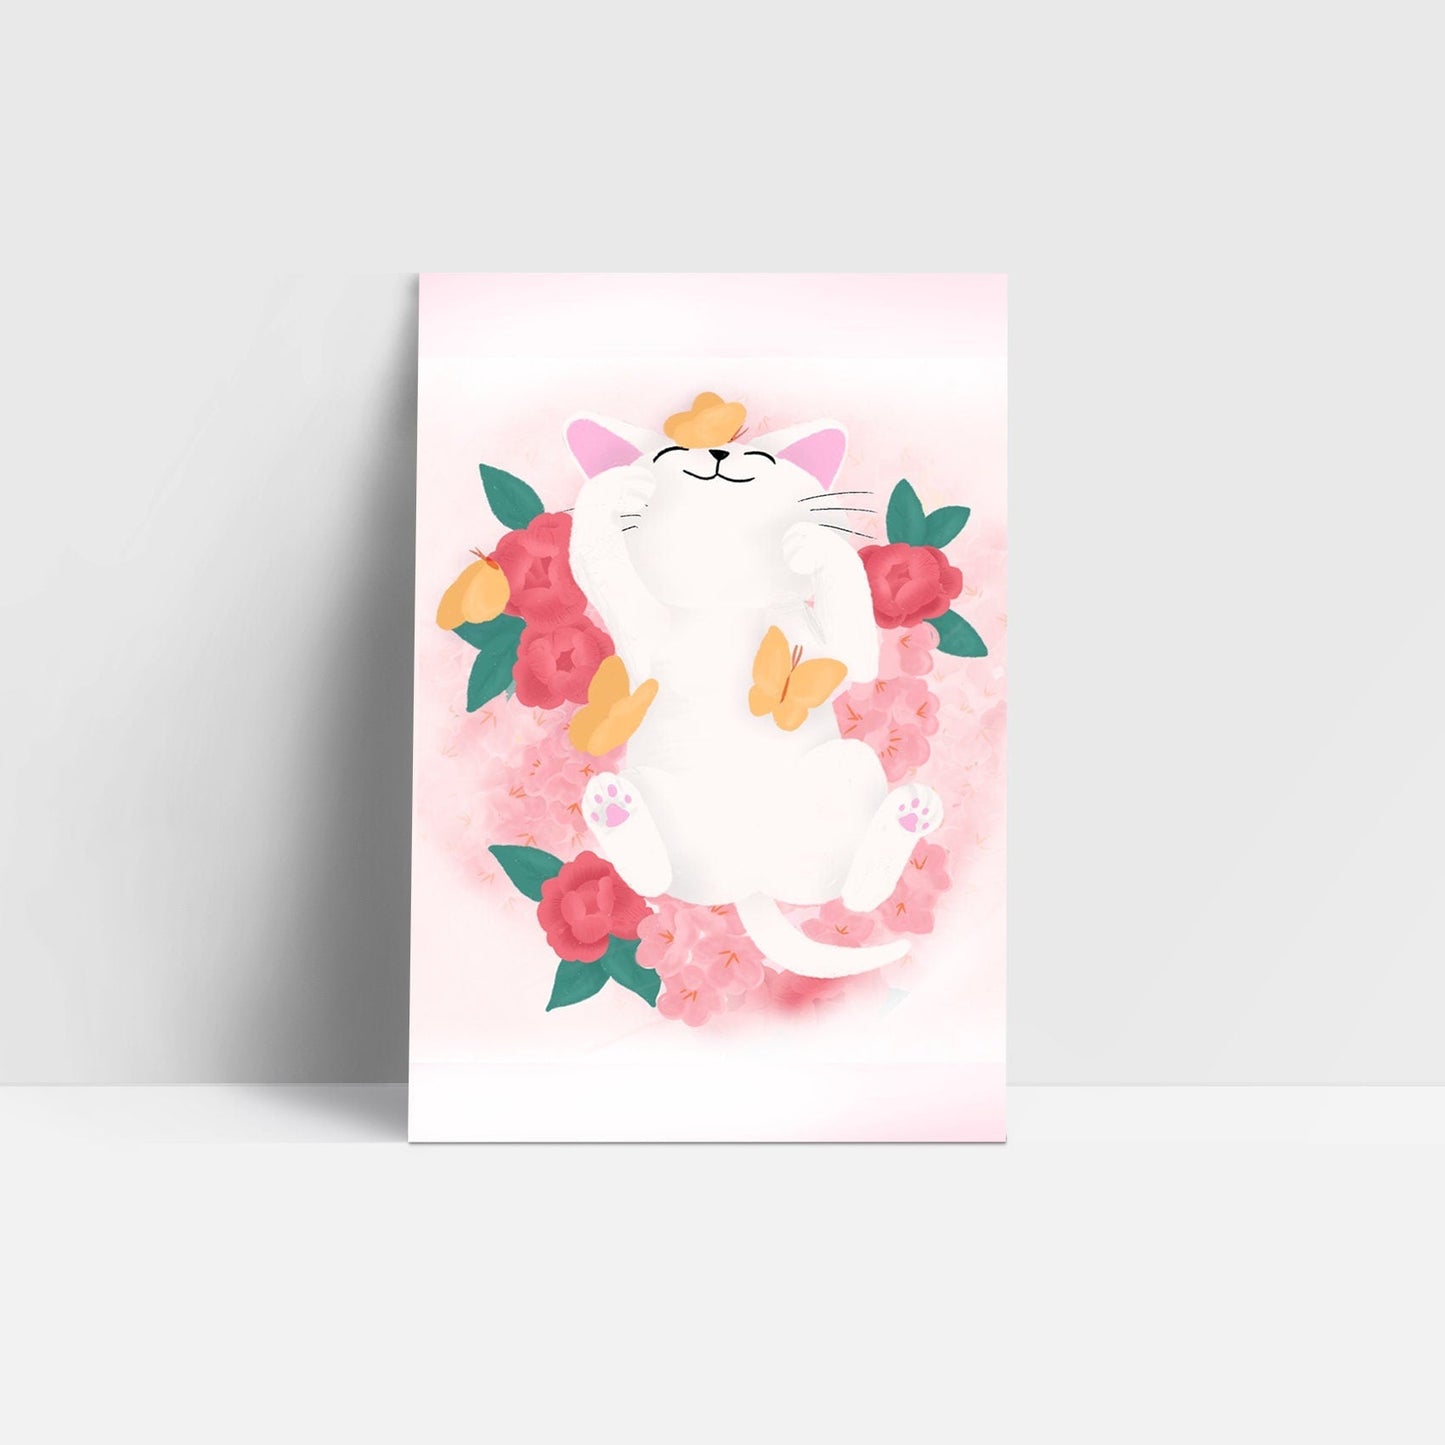 Kitty in Season (Autumn, Spring, Summer, Winter) Postcard Set of 4, Greeting Cards/Postcards, Post Cards